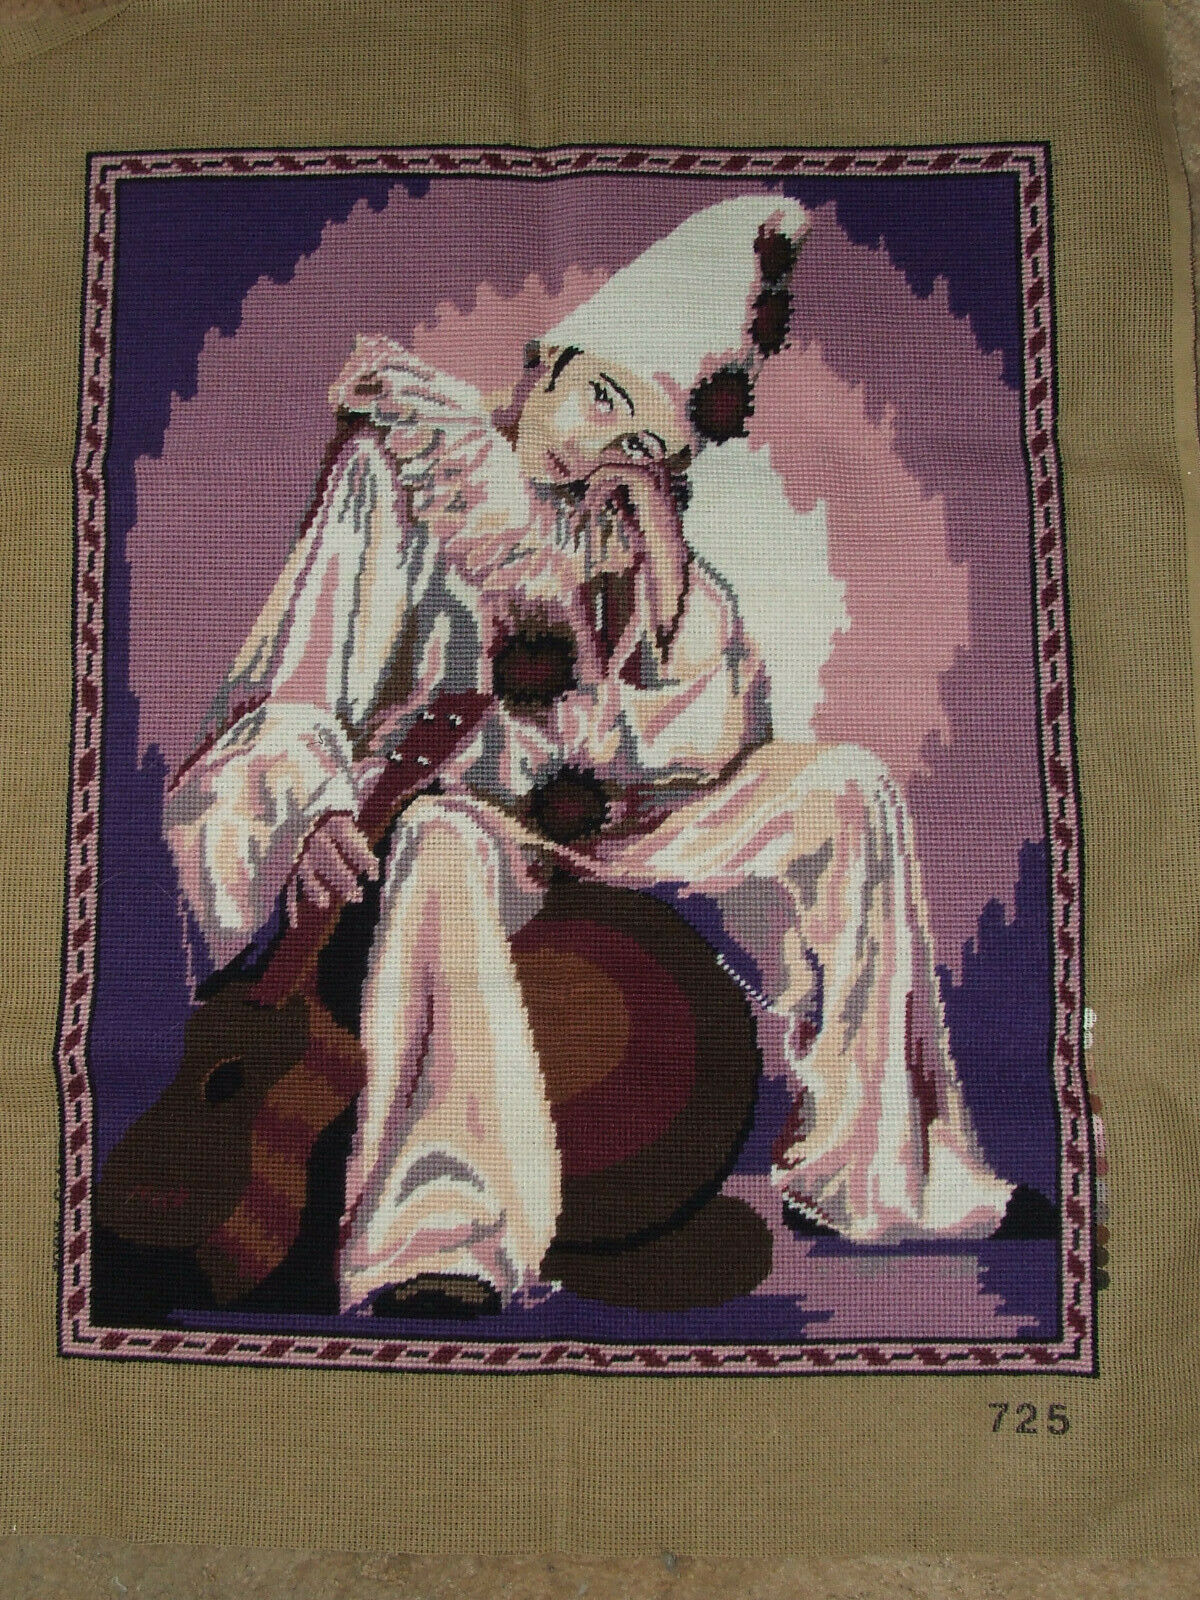 LARGE HARLEQUIN CLOWN JESTER TAPESTRY 18" x 23" approx